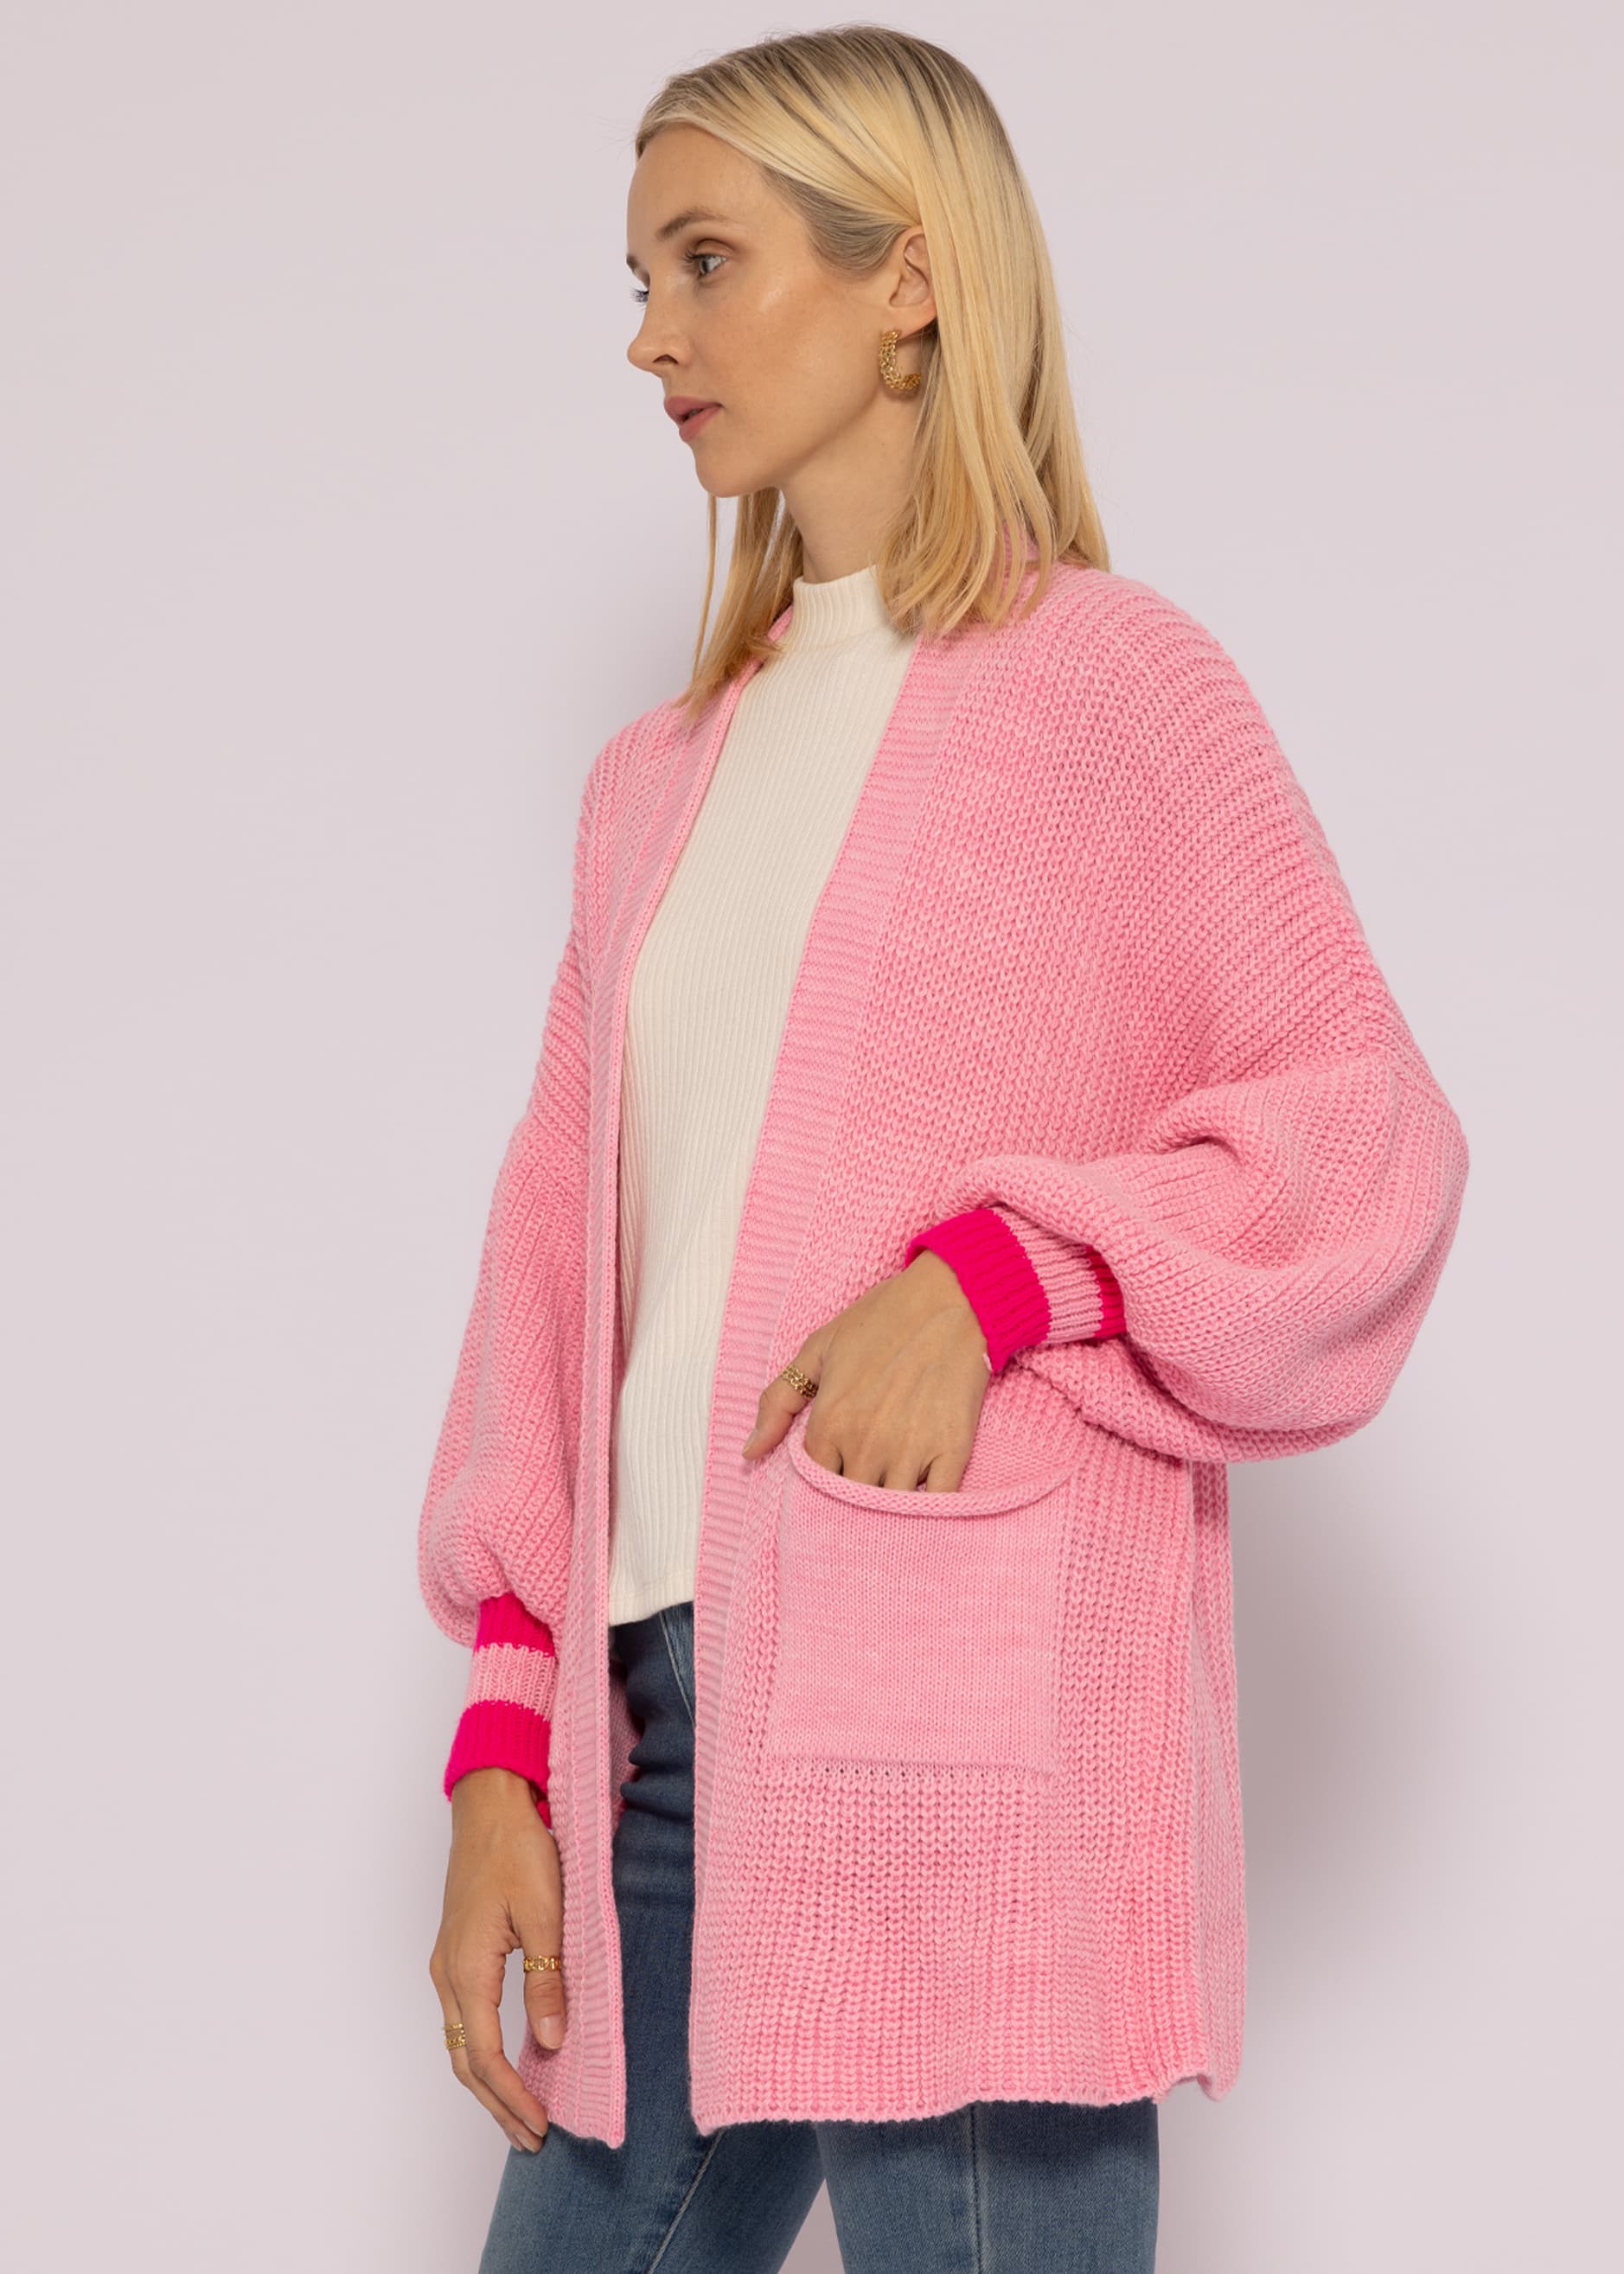 Definitivo embrague Imposible Cardigan pink with pink stripes knit | SassyClassy.com